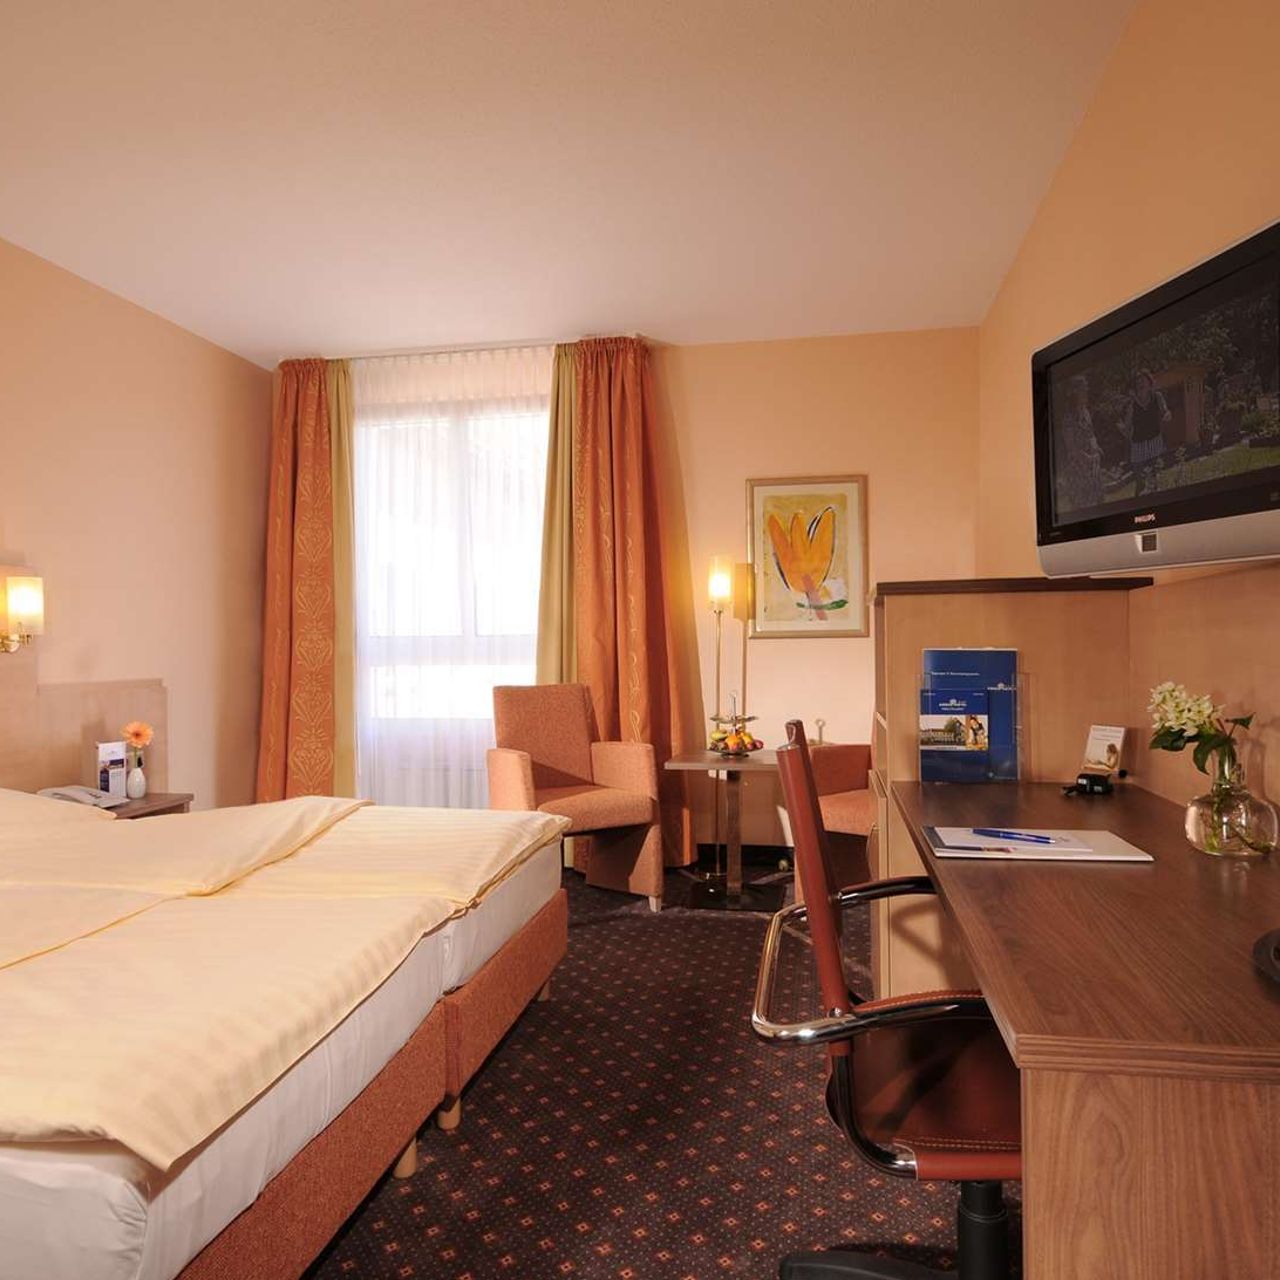 Hotel Amber - Hilden - Great prices at HOTEL INFO